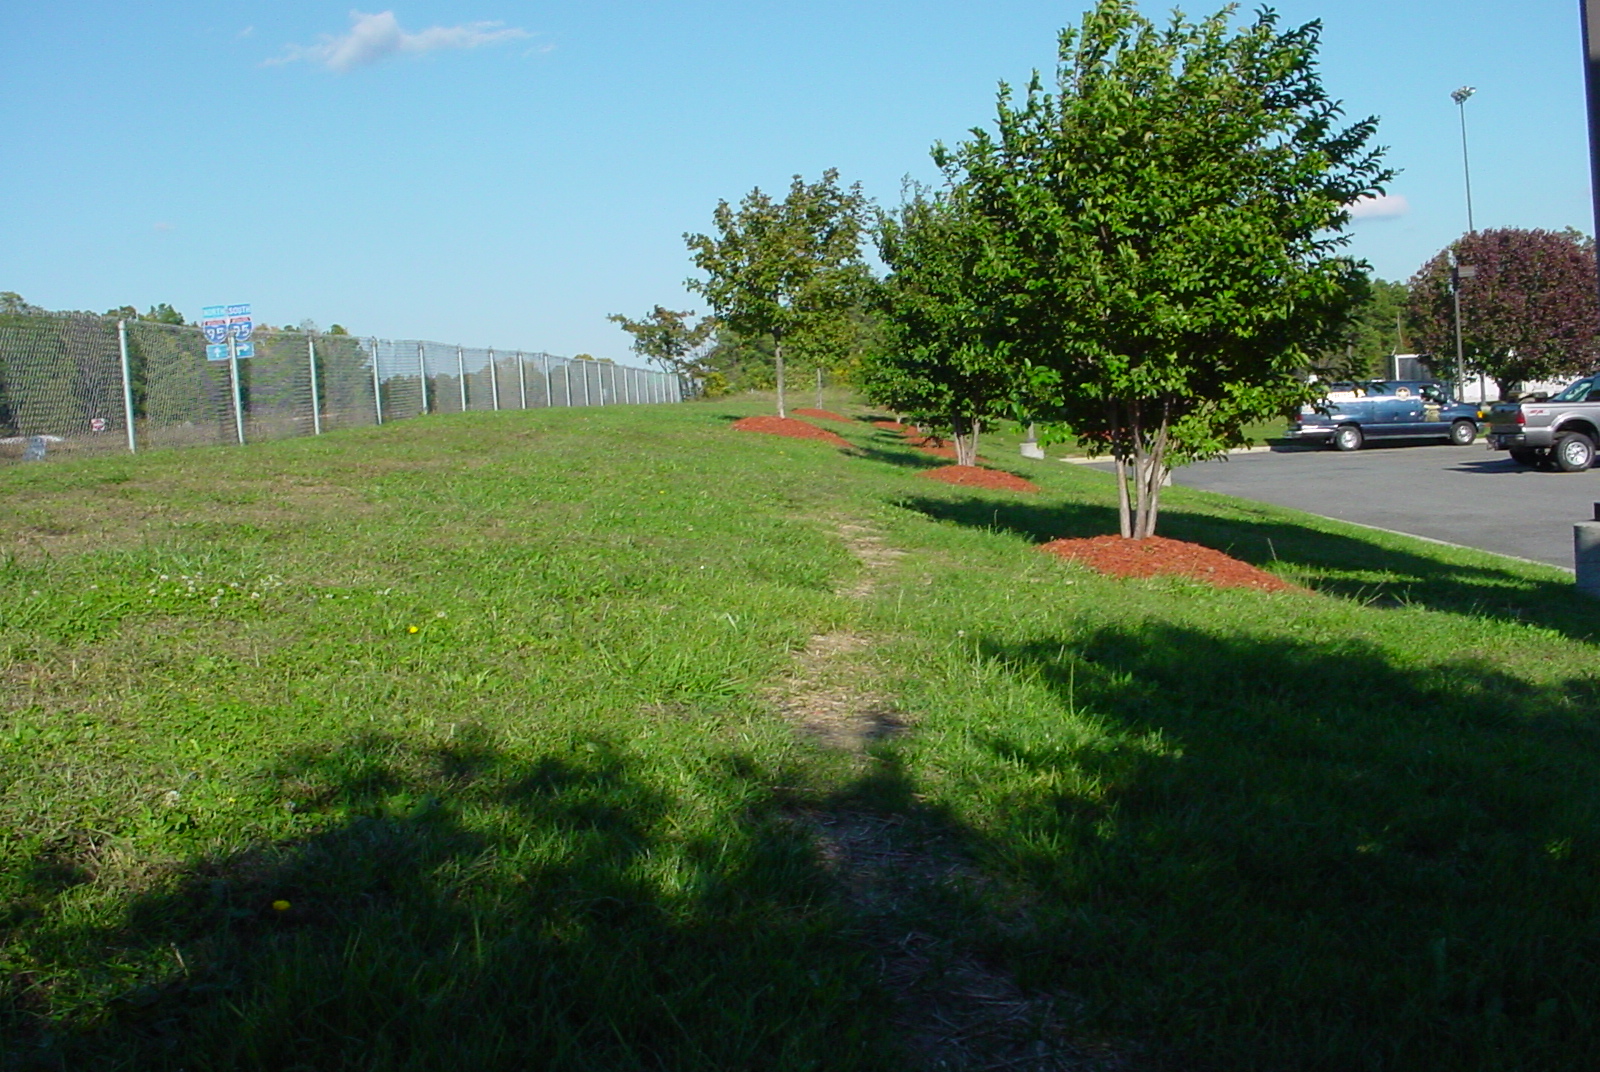 Grassy exercise area at a Flying J